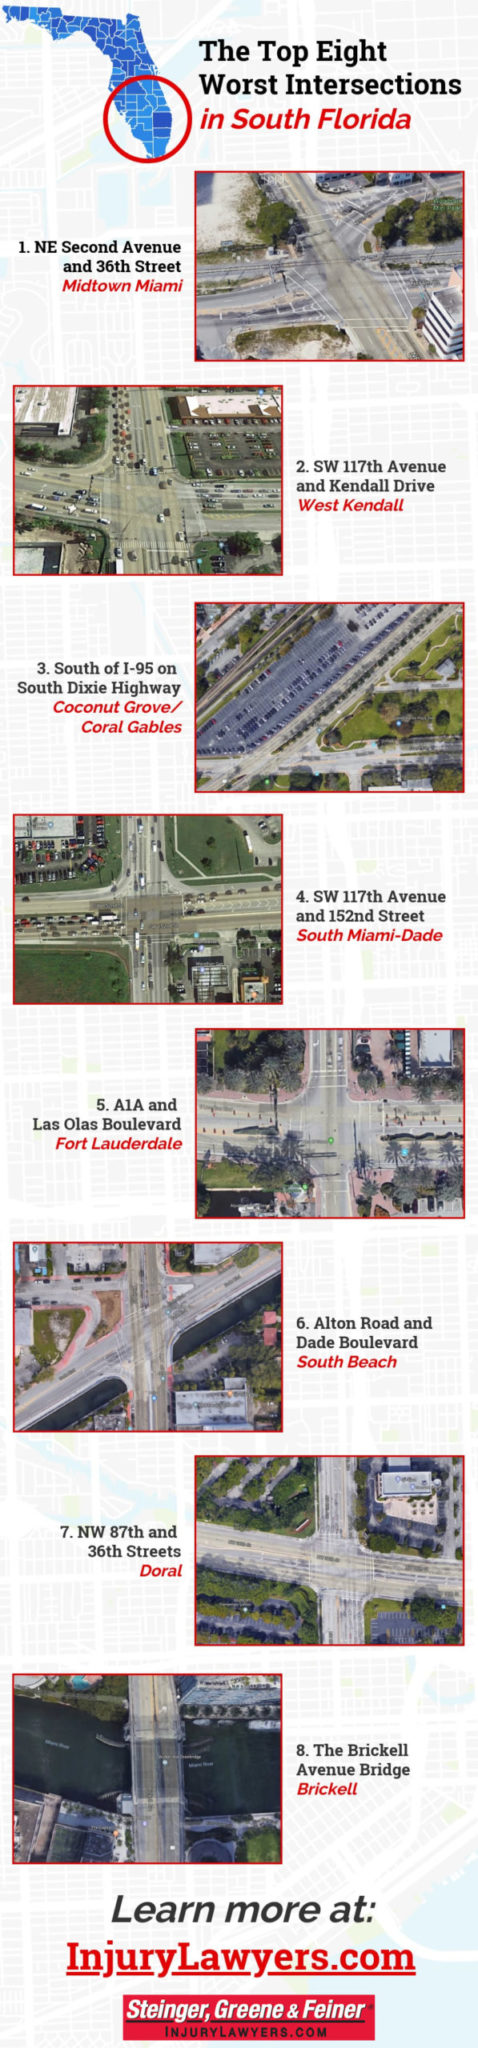 The-Top-Eight-Worst-Intersections-in-South-Florida-infographic